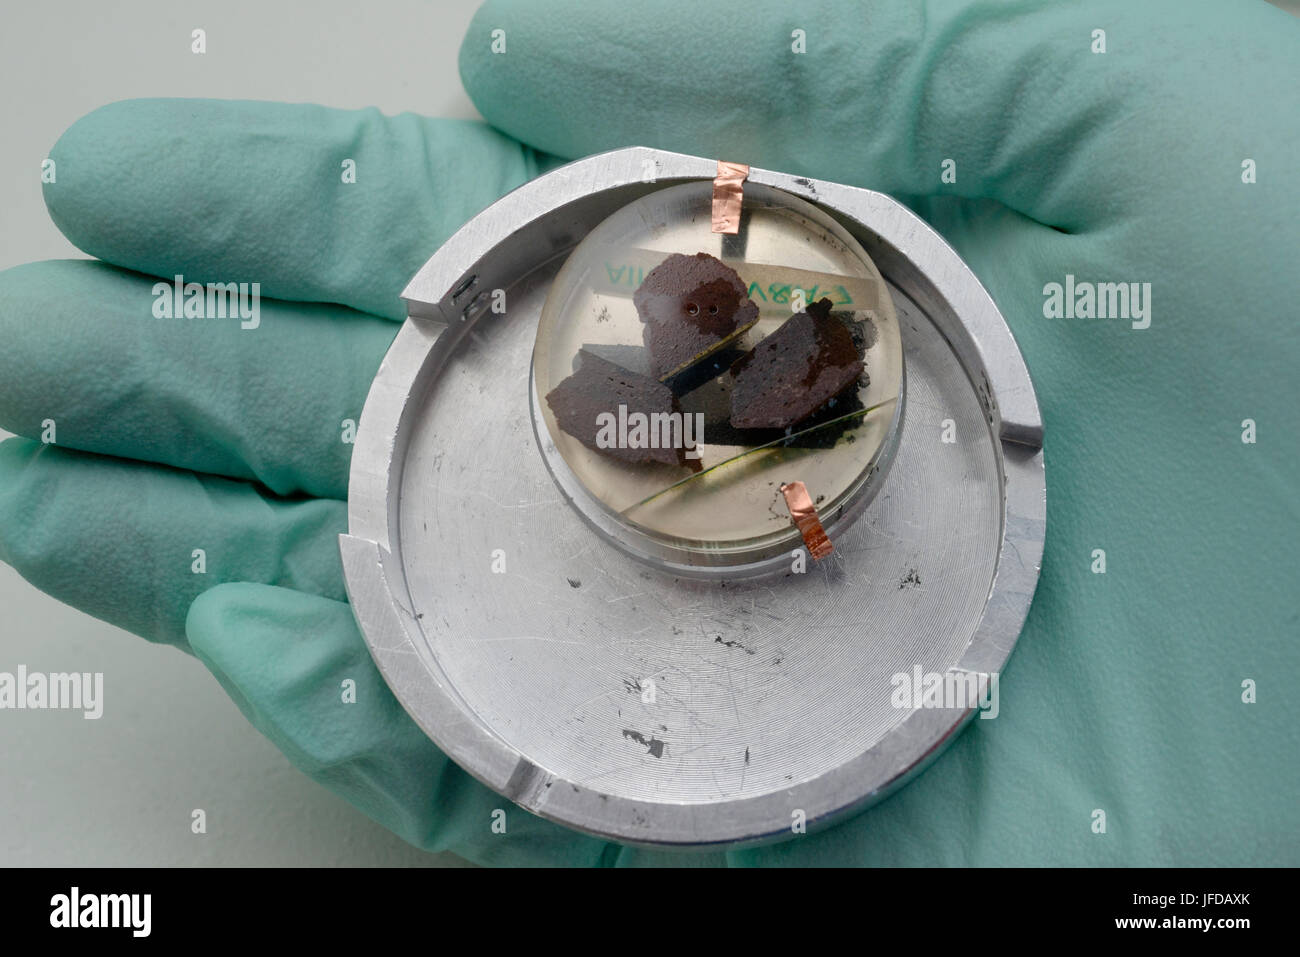 9th Century Syrian pottery fragments in the specimen holder of a Scanning Electron Microscope. Stock Photo